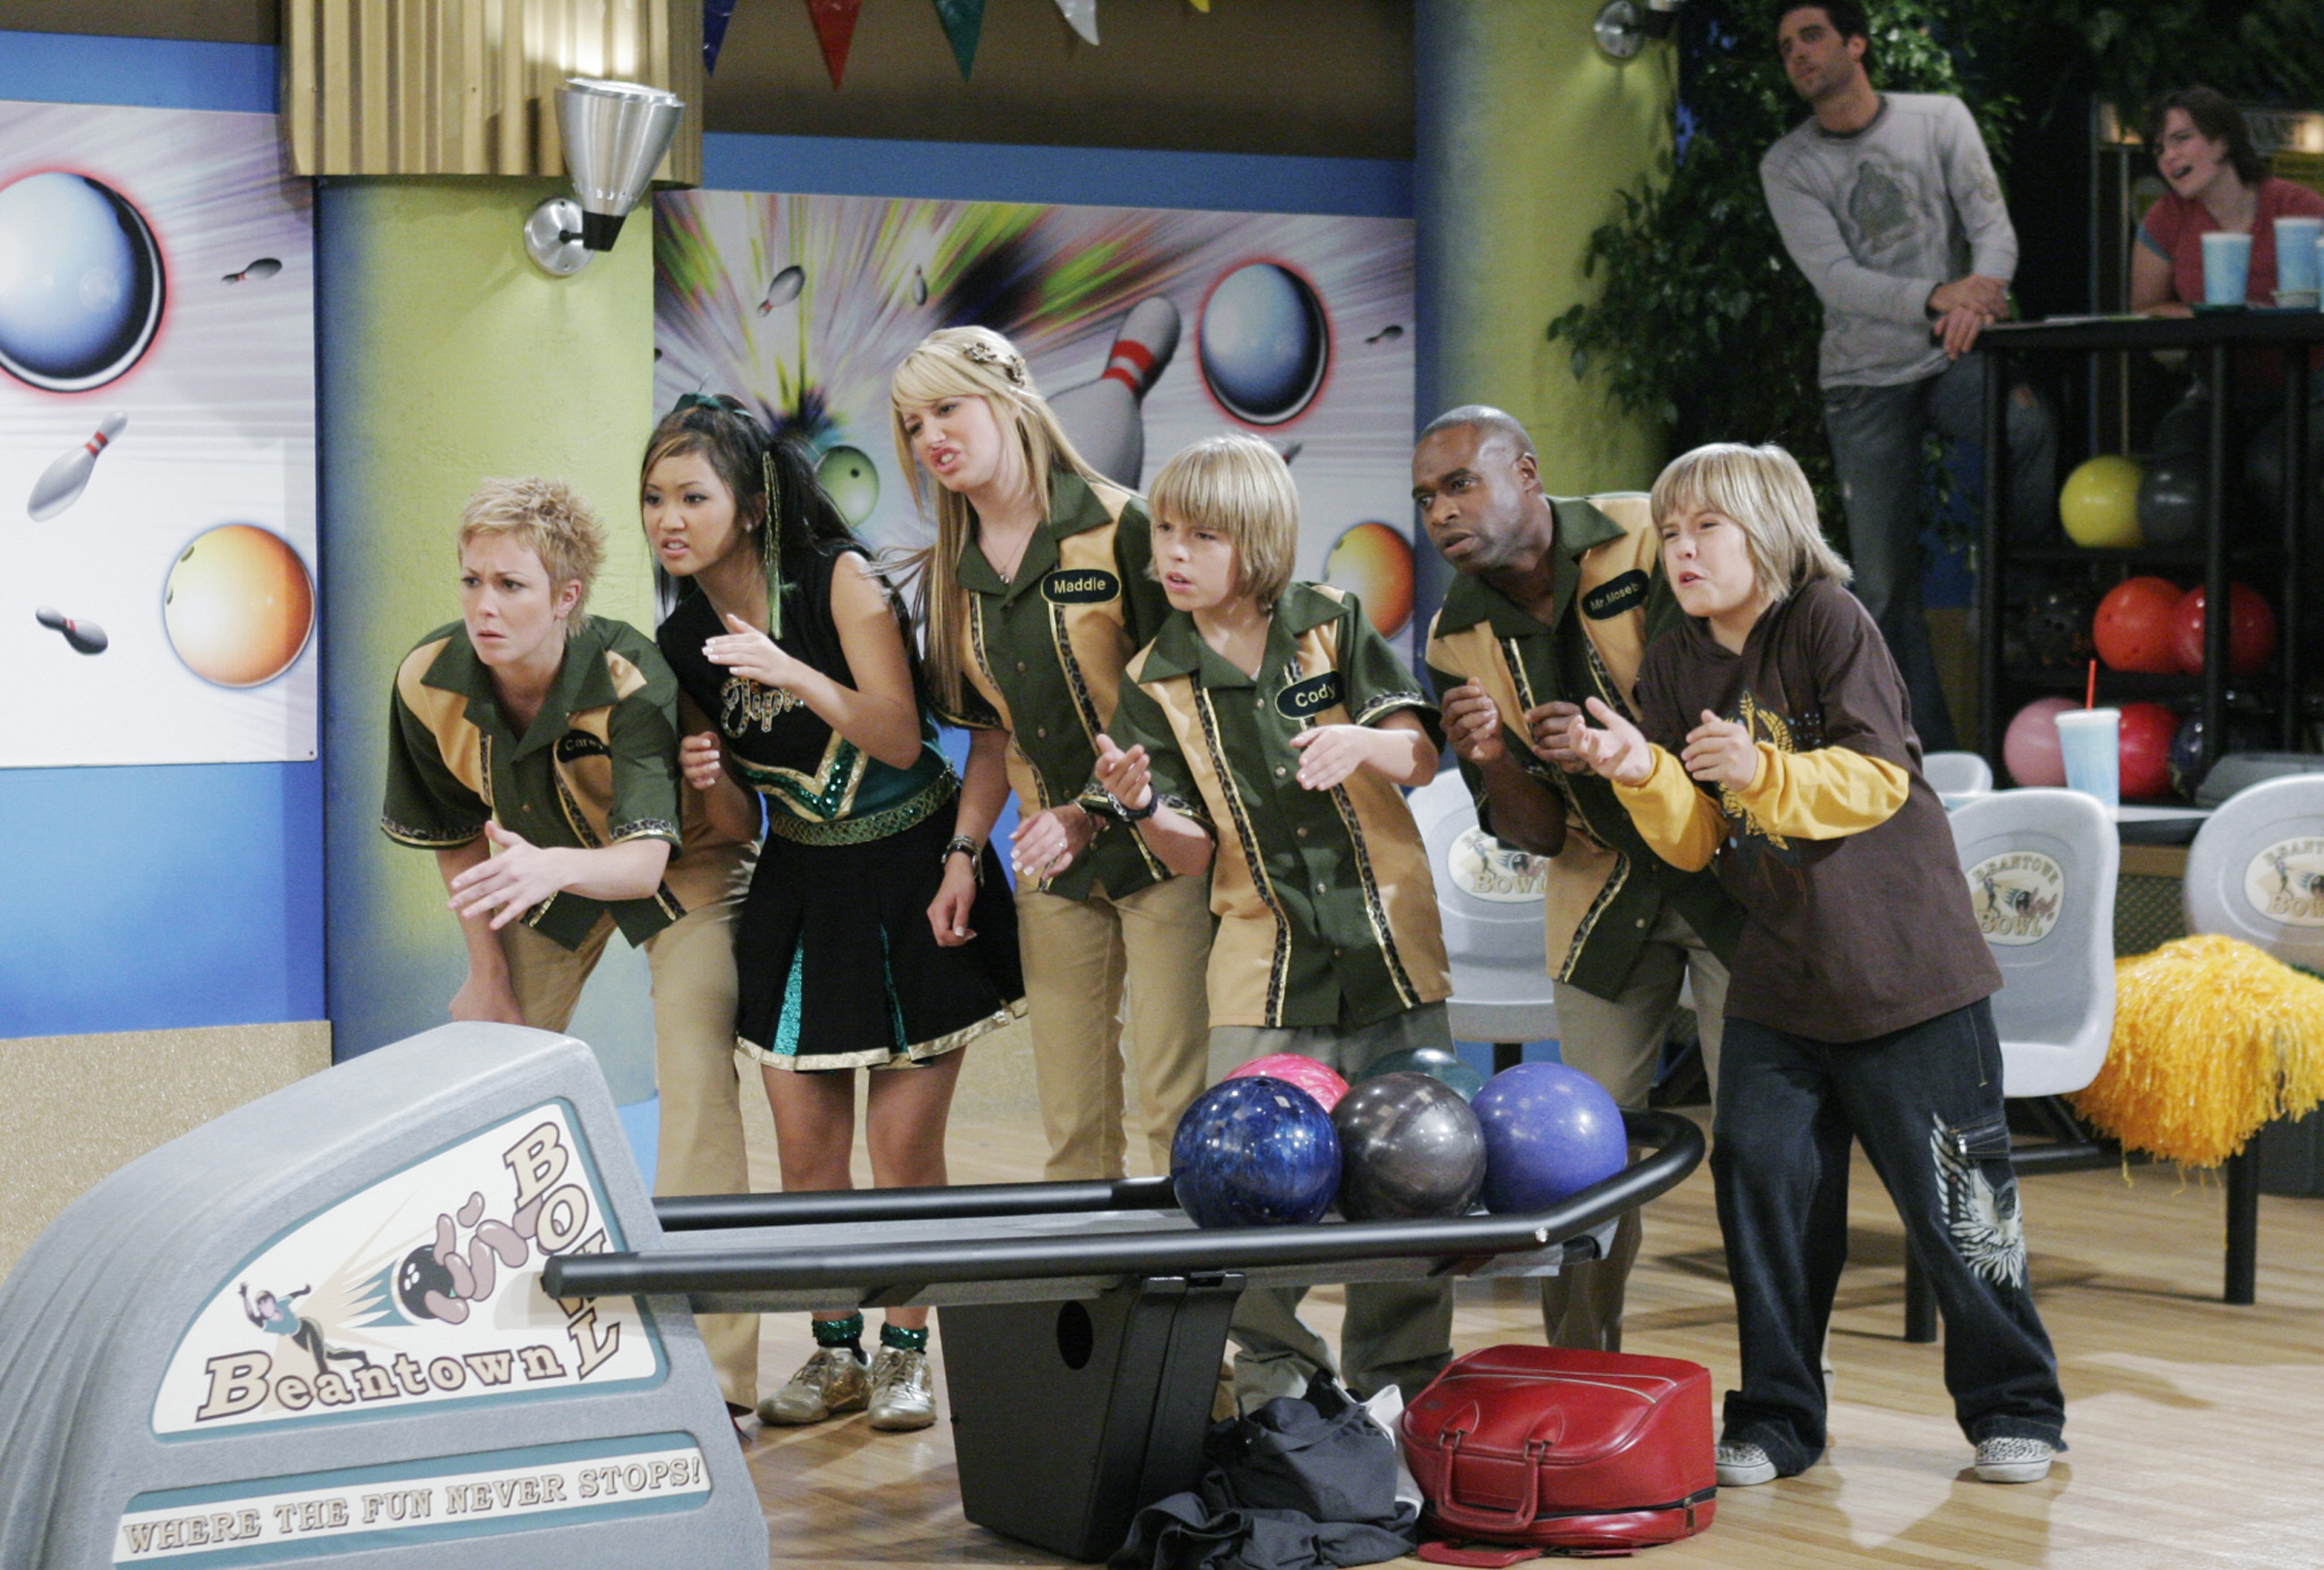 Dylan Sprouse in The Suite Life of Zack and Cody (Season 2)